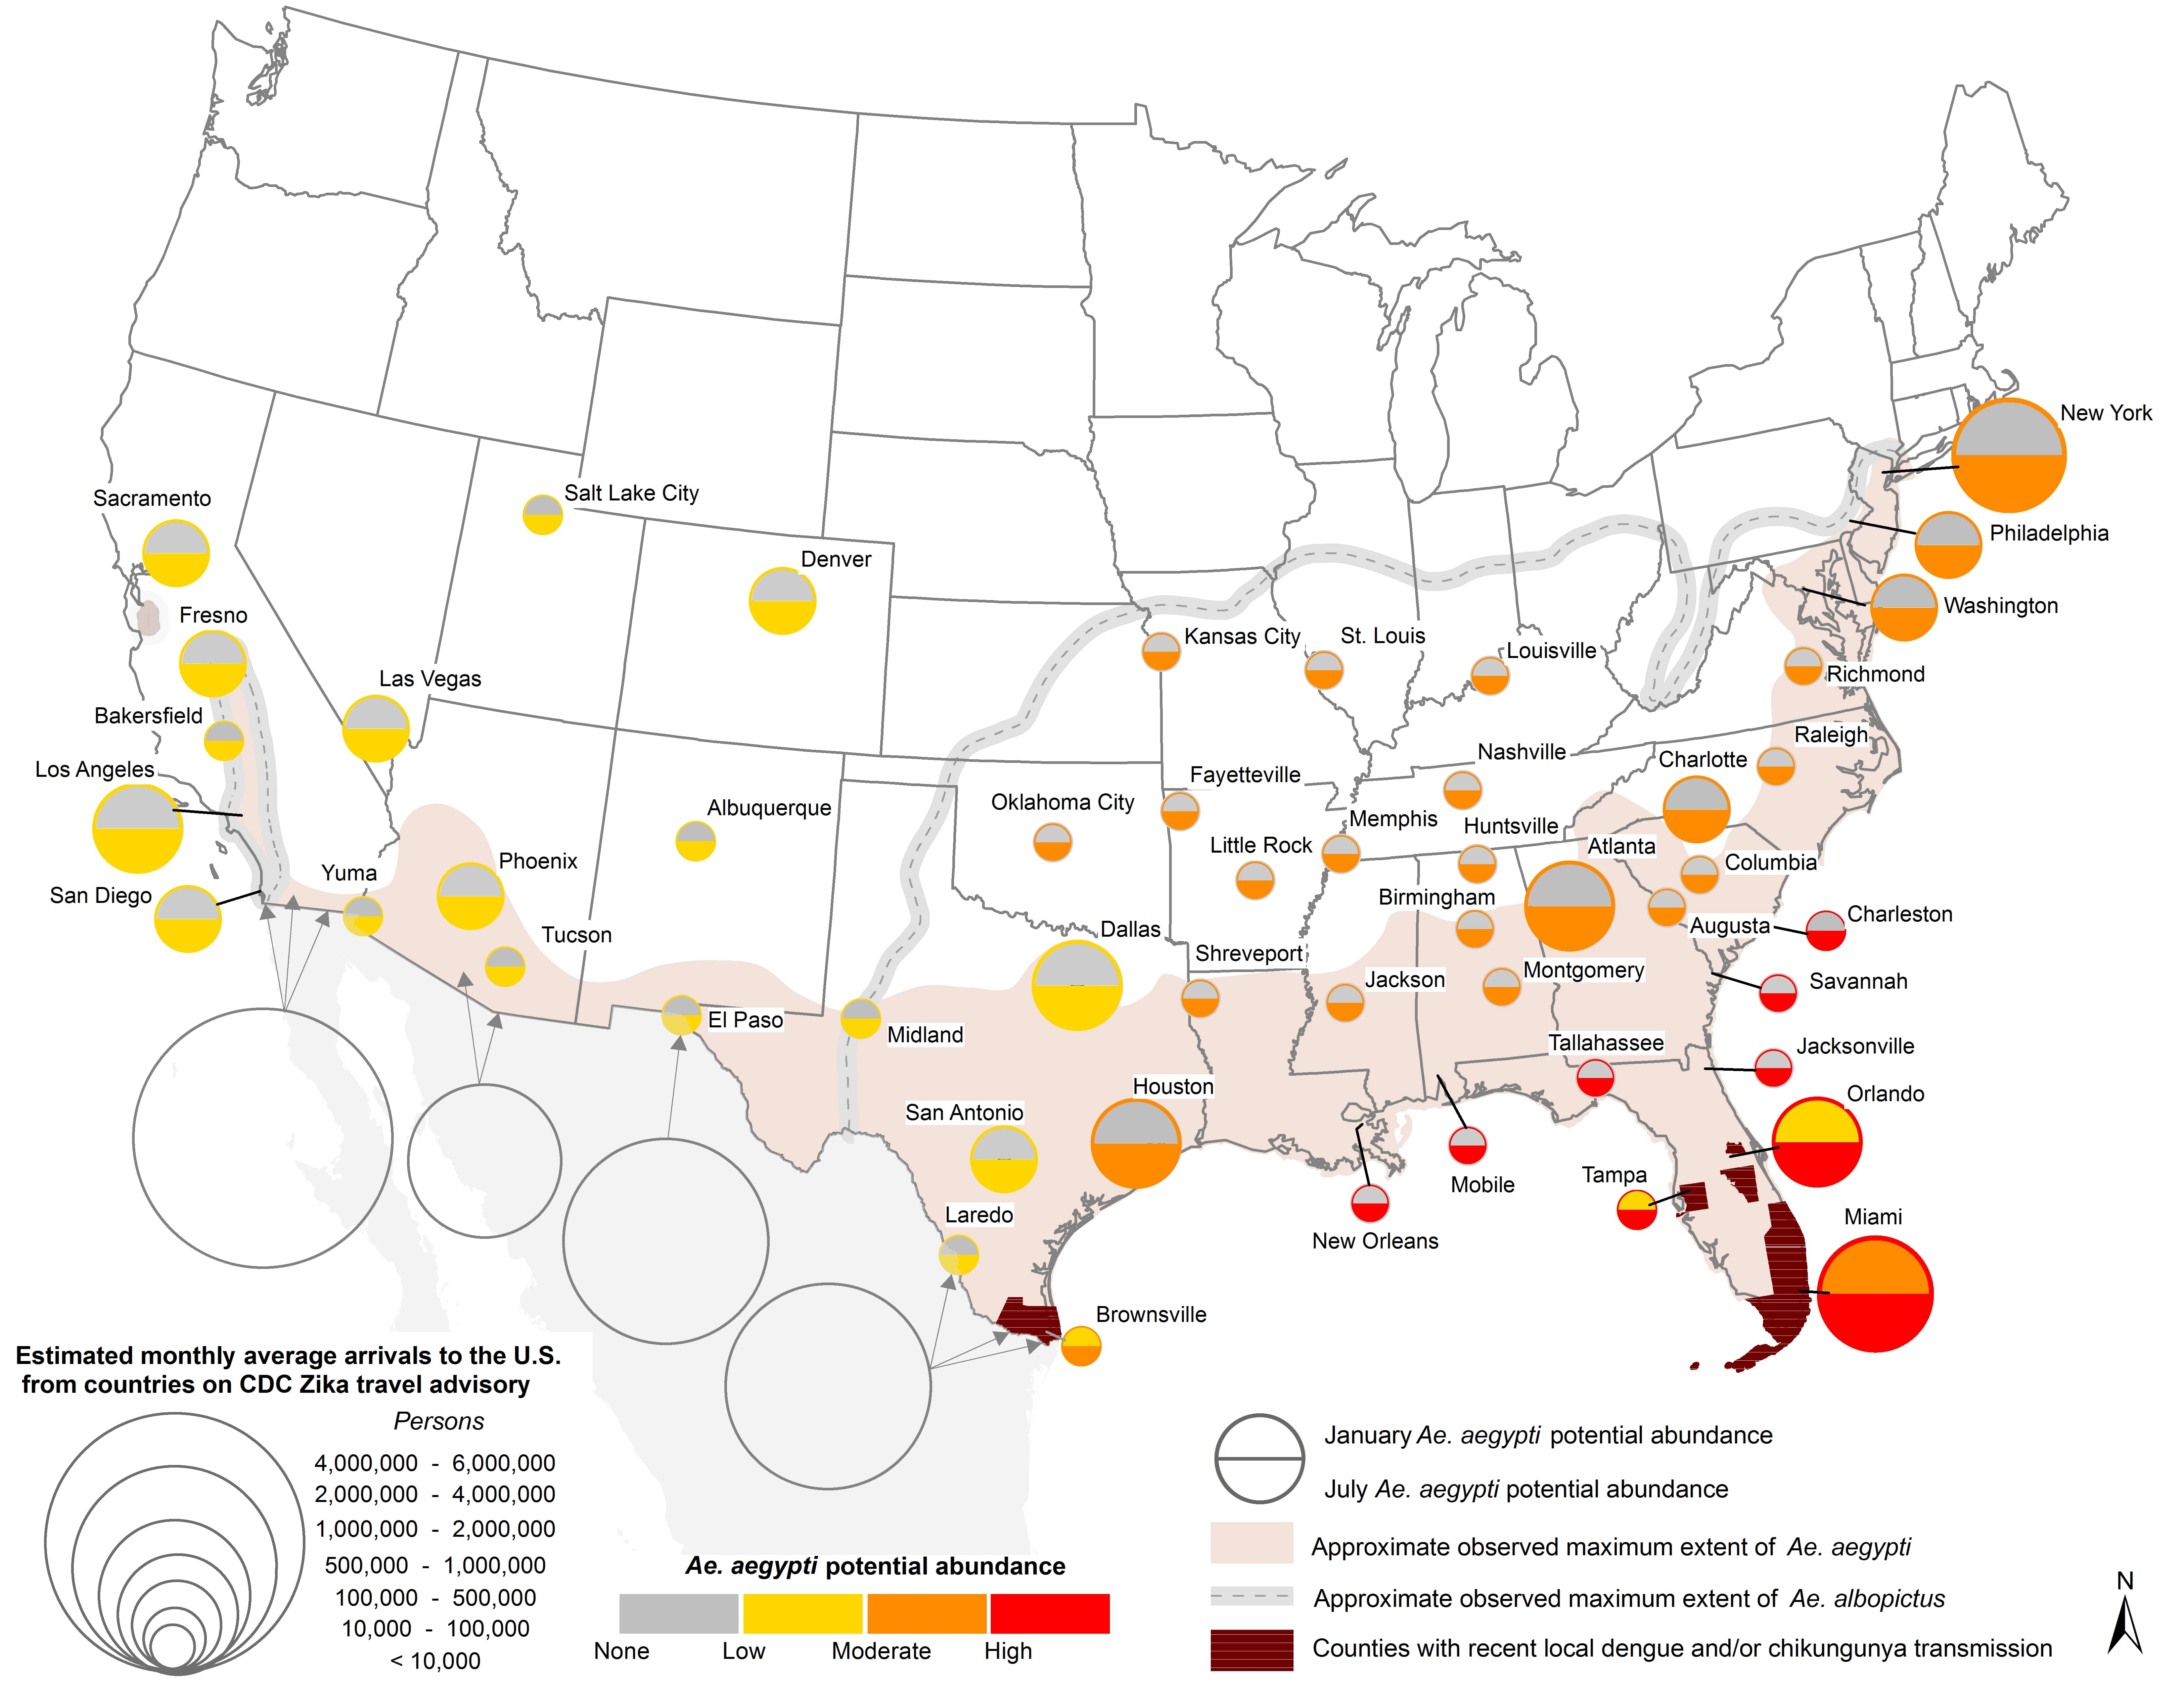 map of potential zika outbreak areas